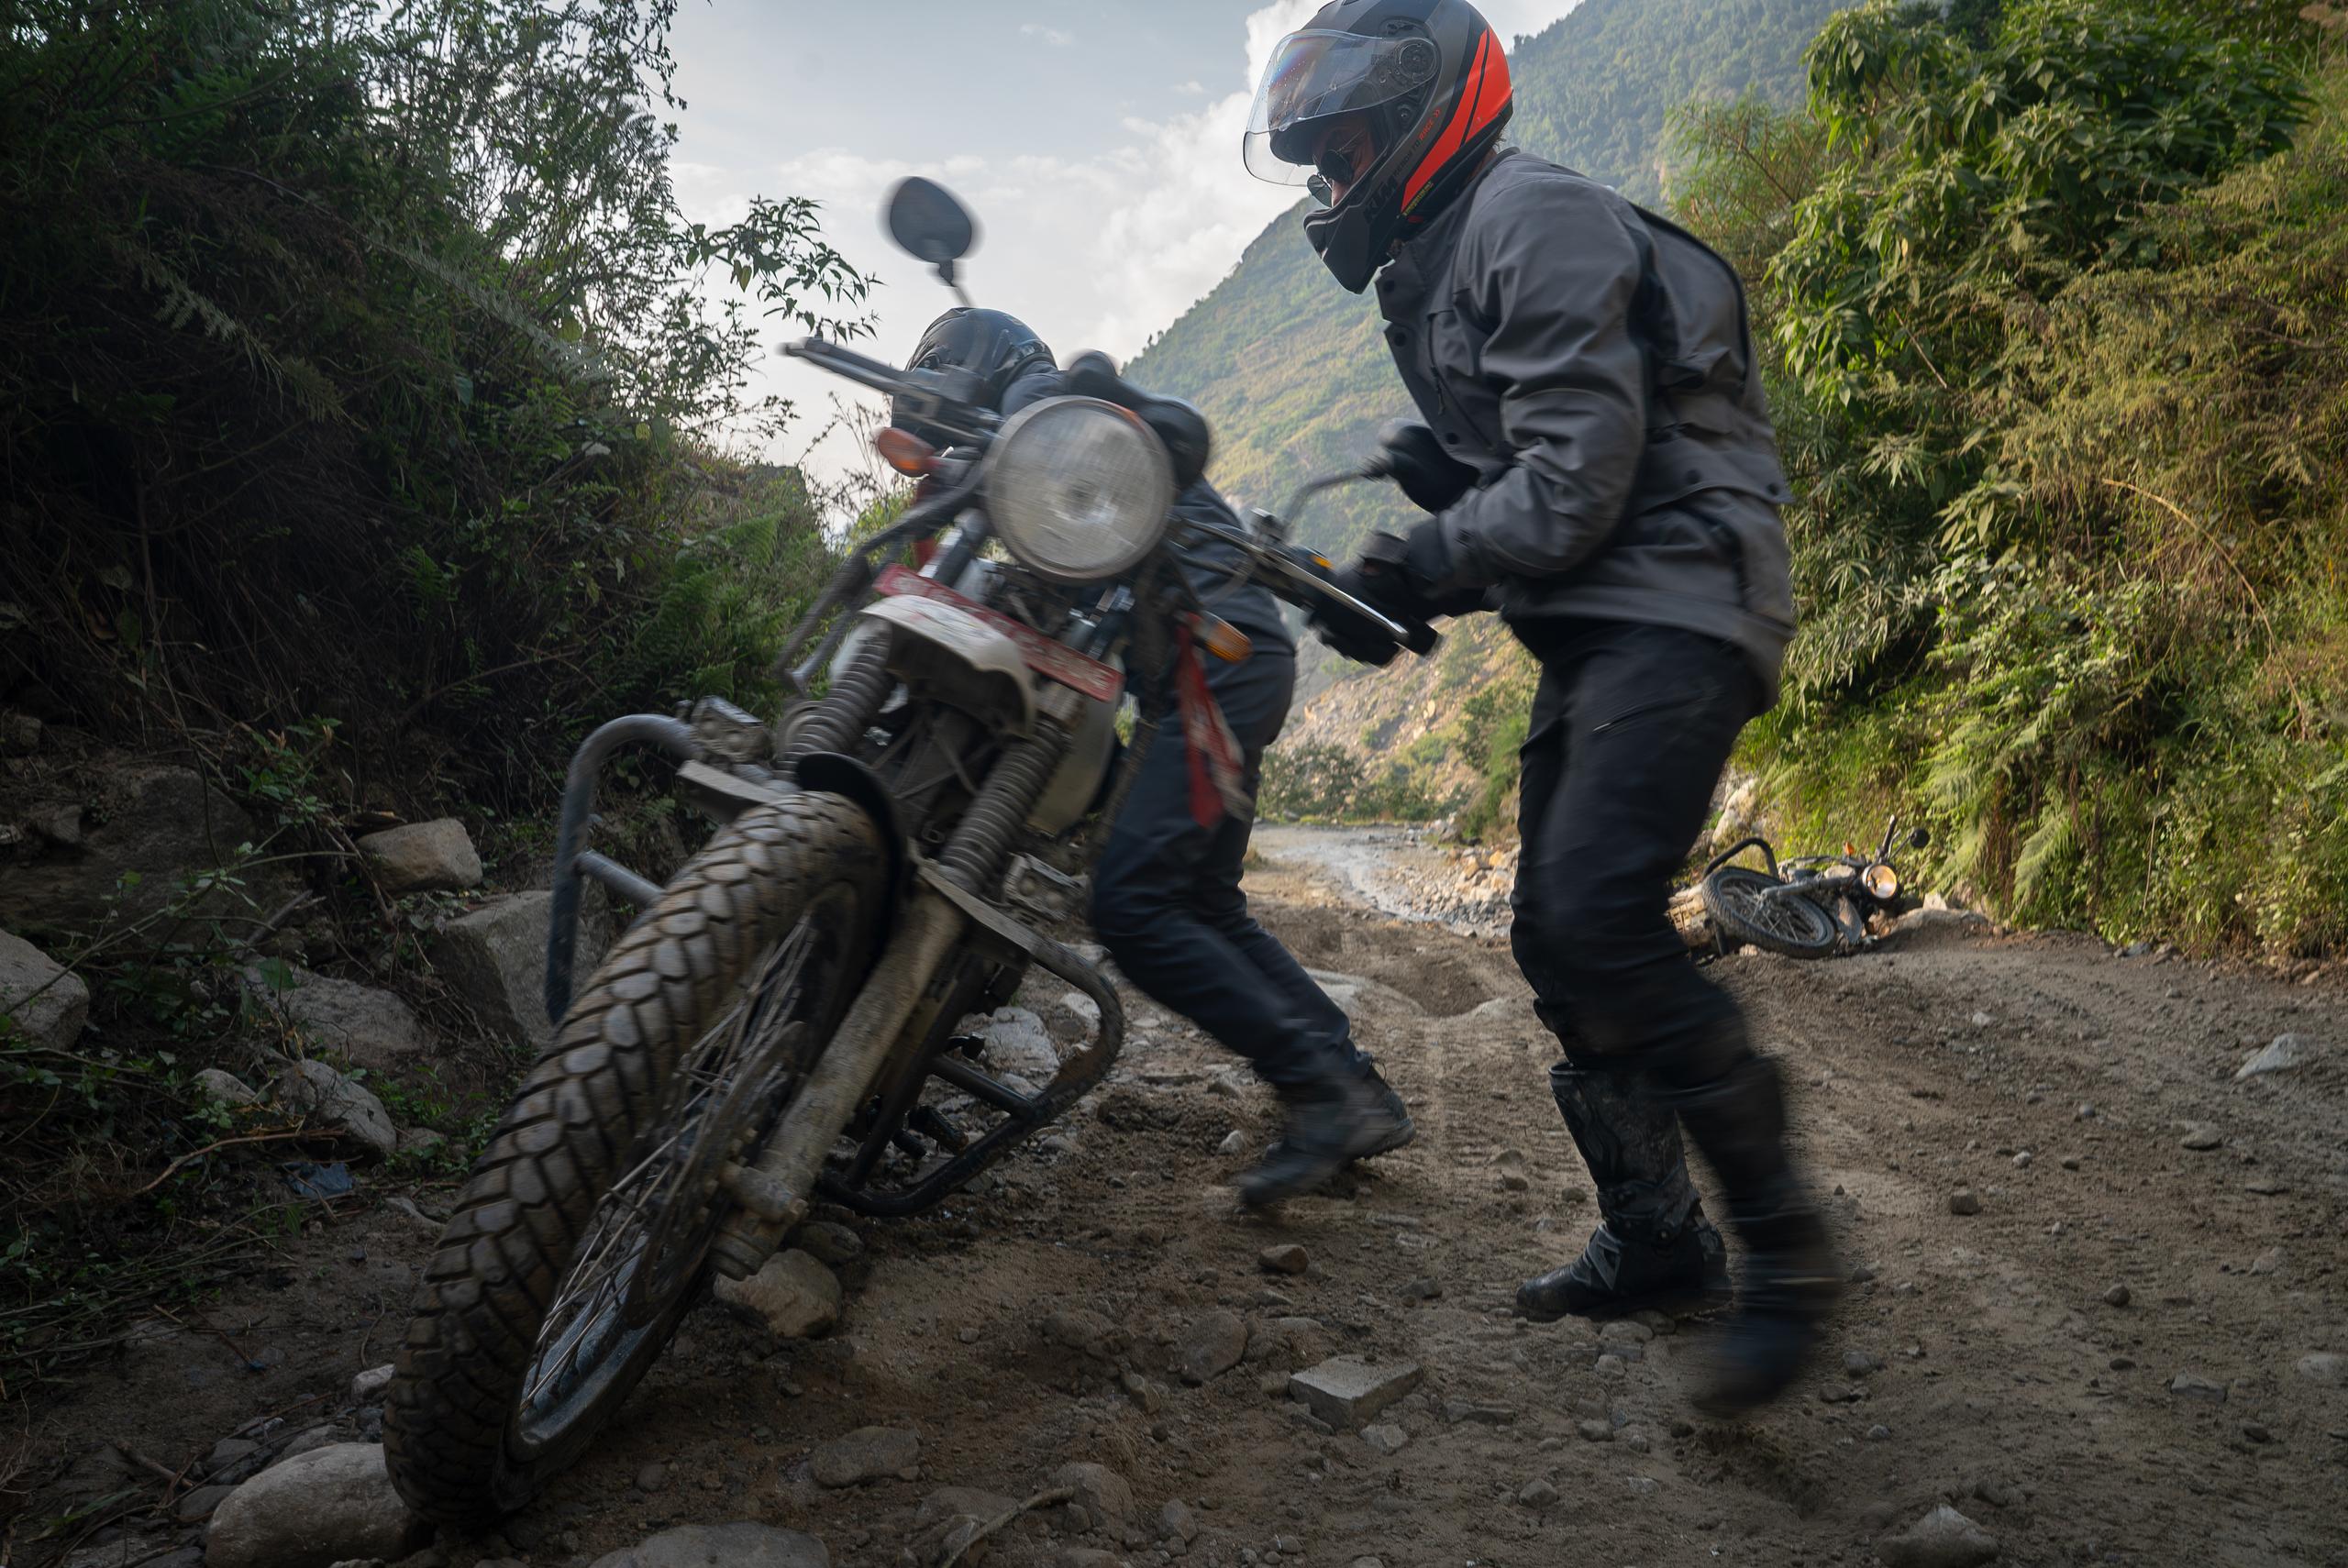 Two men lifting up fallen motorcycle on dirt road in mountains of Nepal